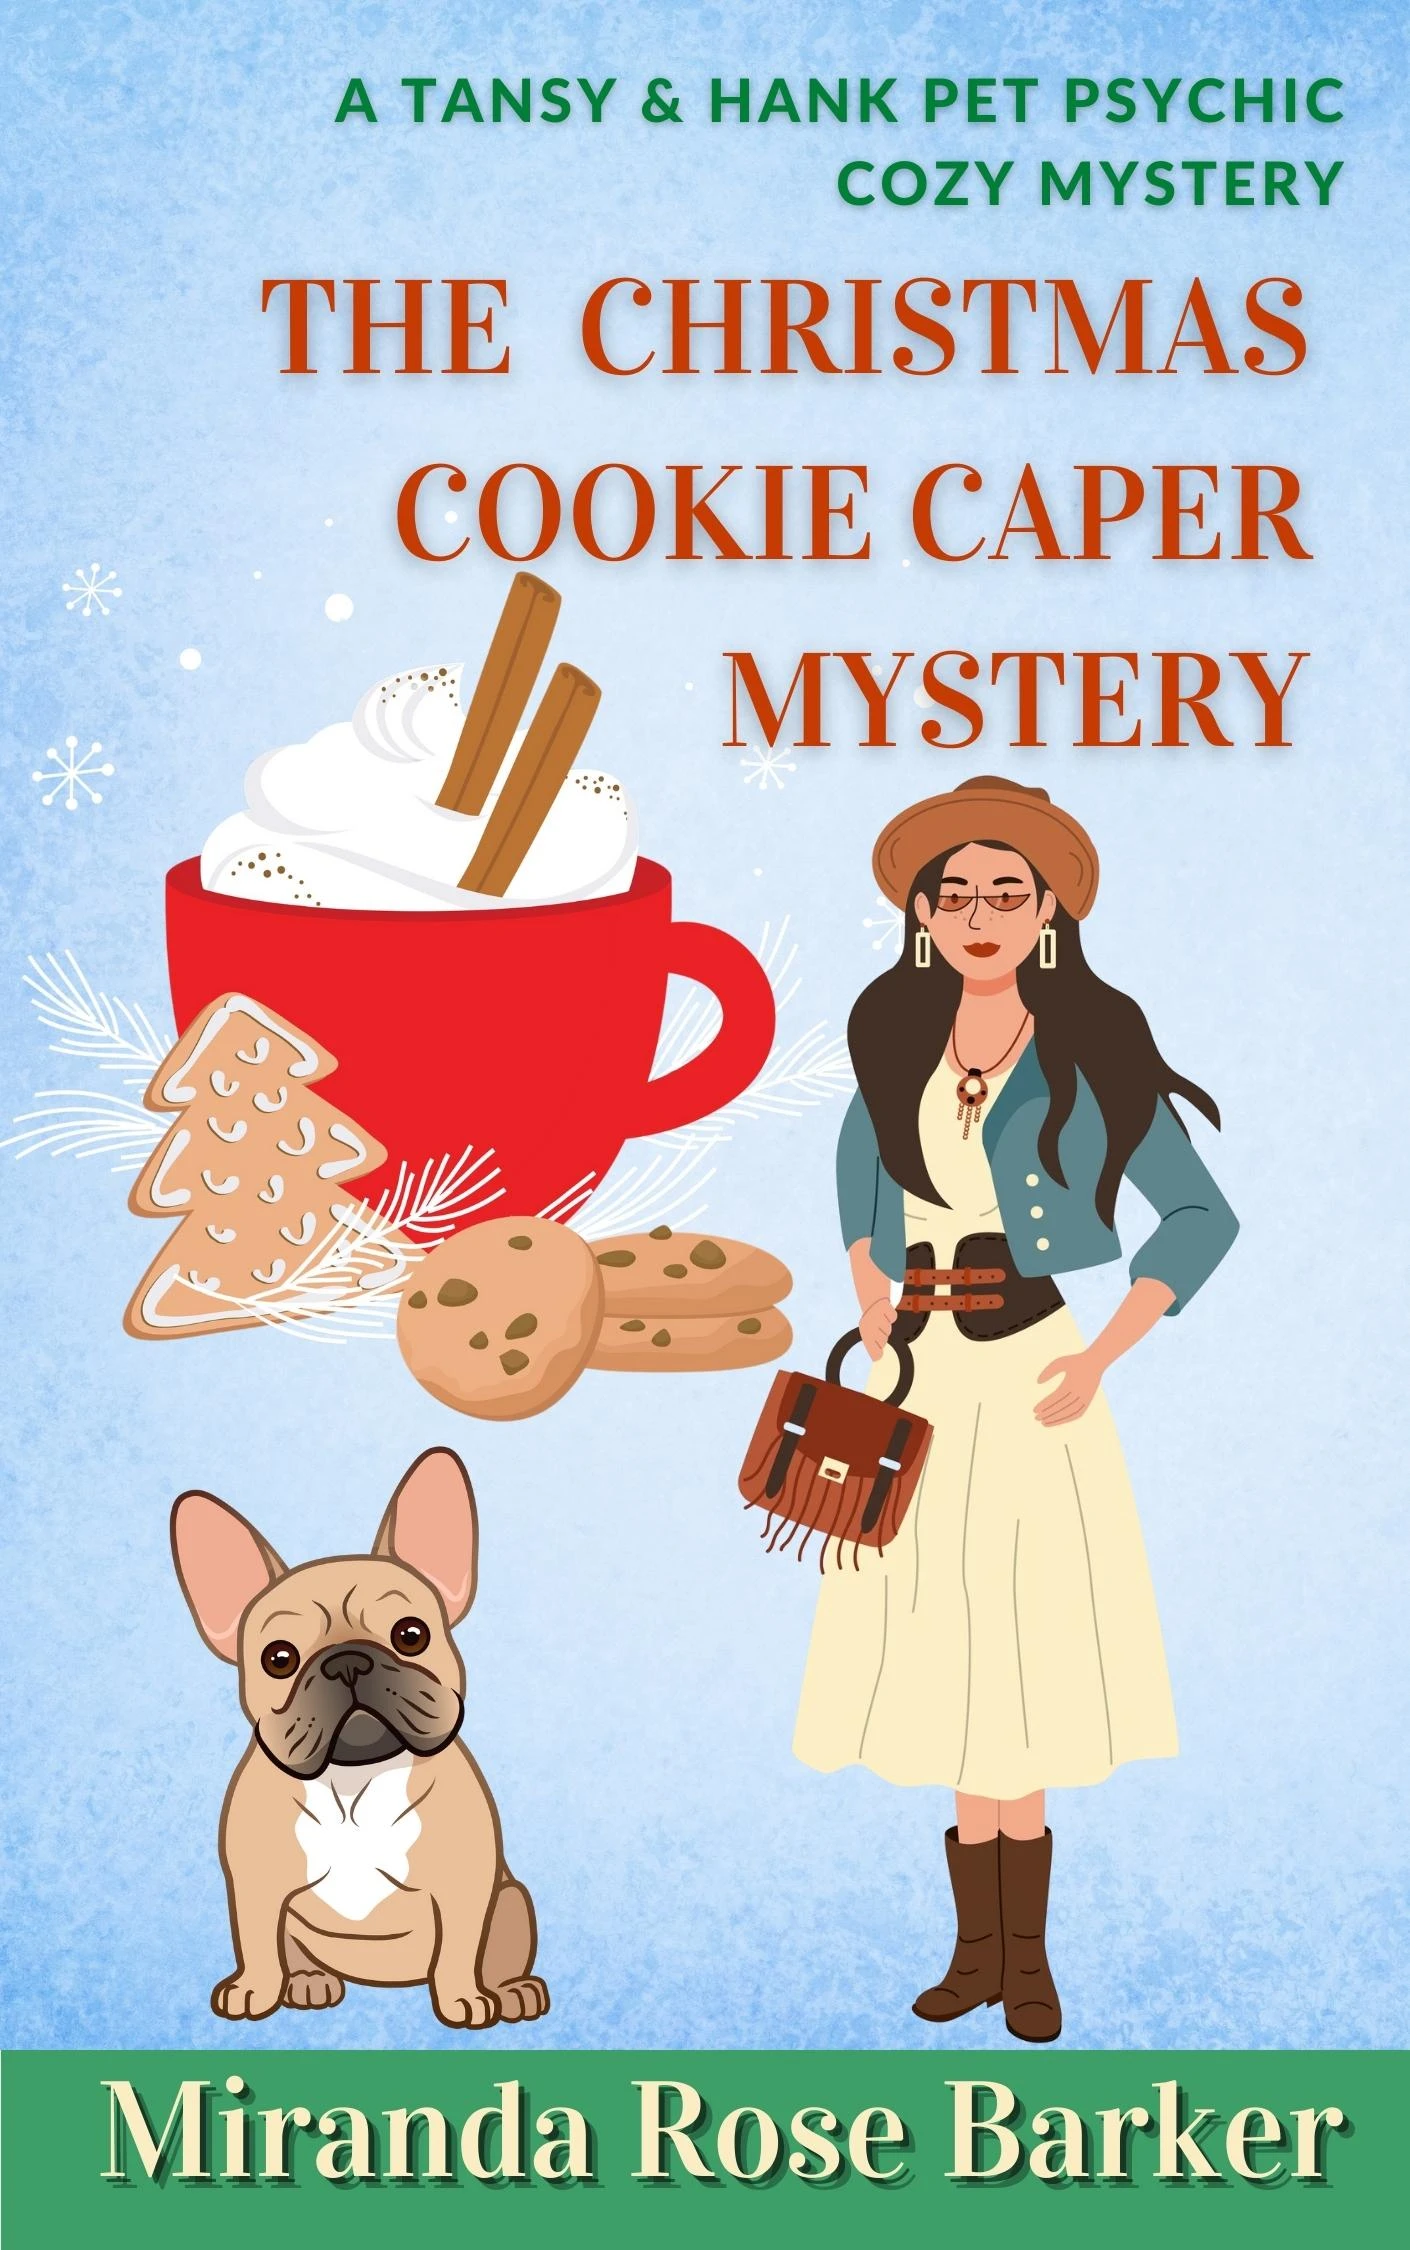 The Christmas Cookie Caper Mystery